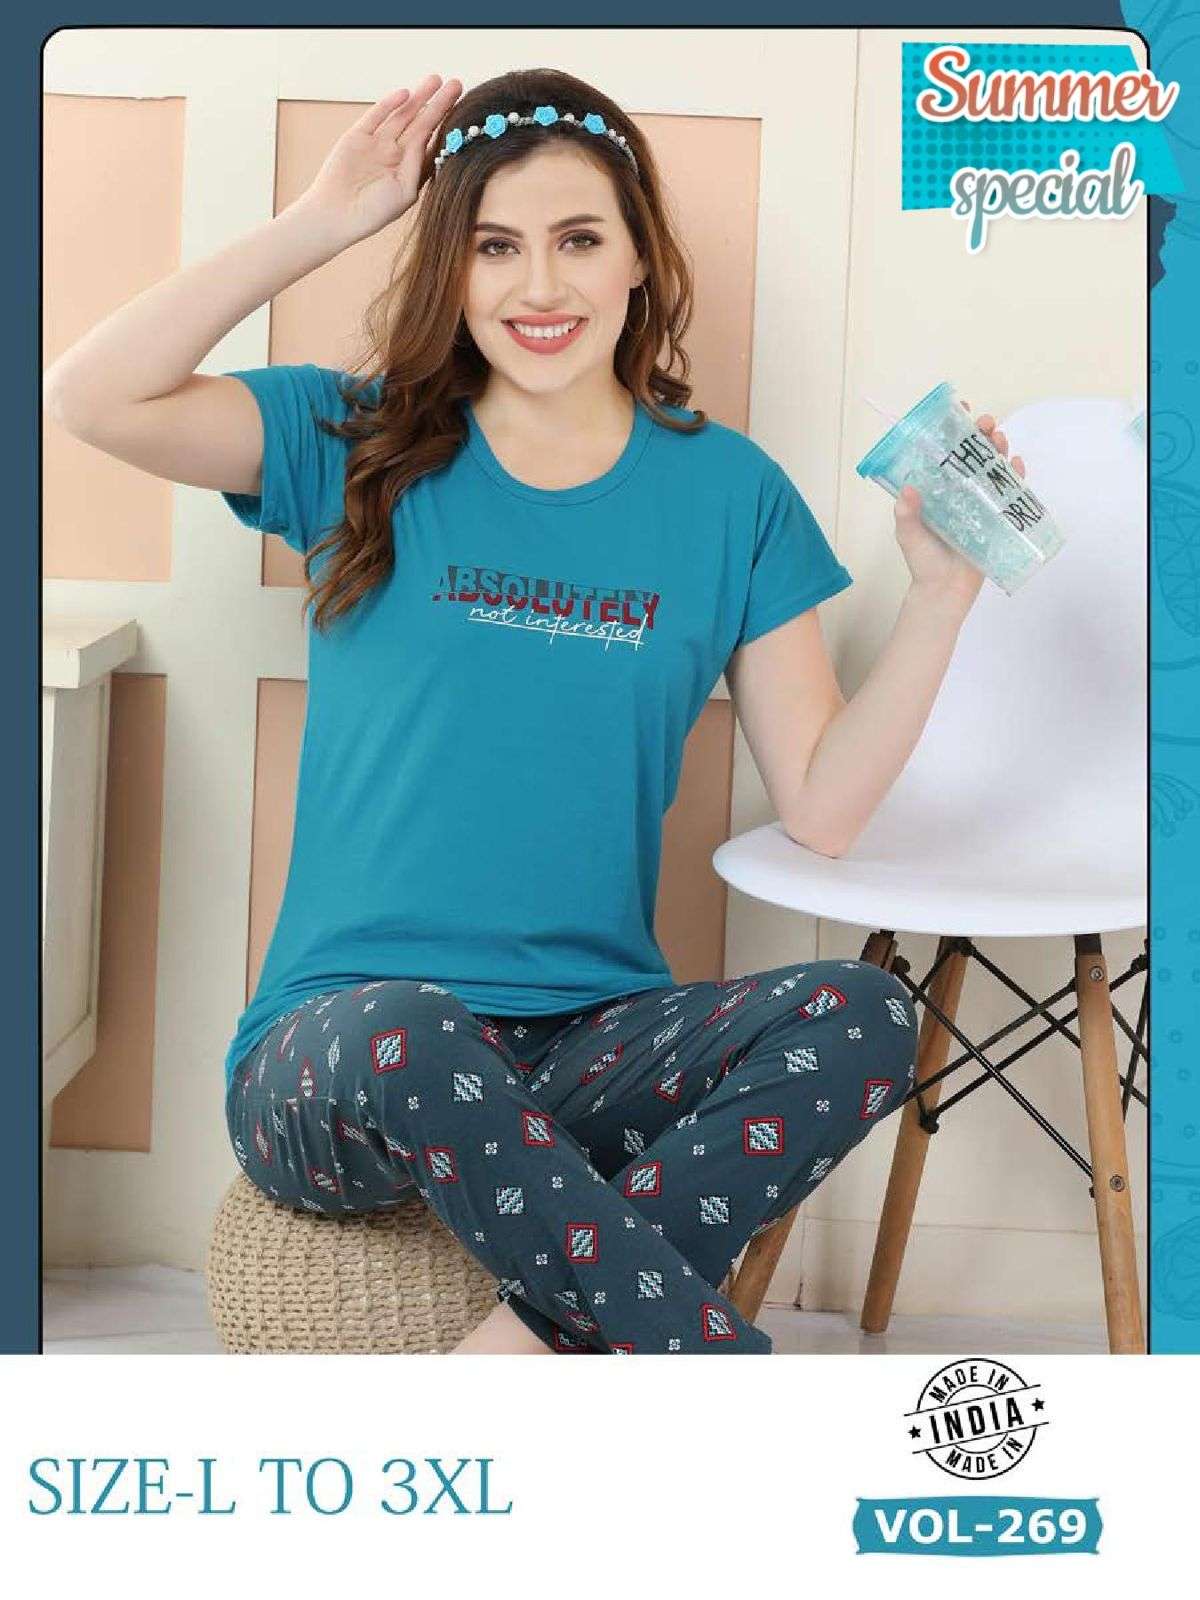 SUMMER SPECIAL VOL.269 Heavy Shinker Hosiery Cotton Night Suits CATALOG WHOLESALER BEST RATE